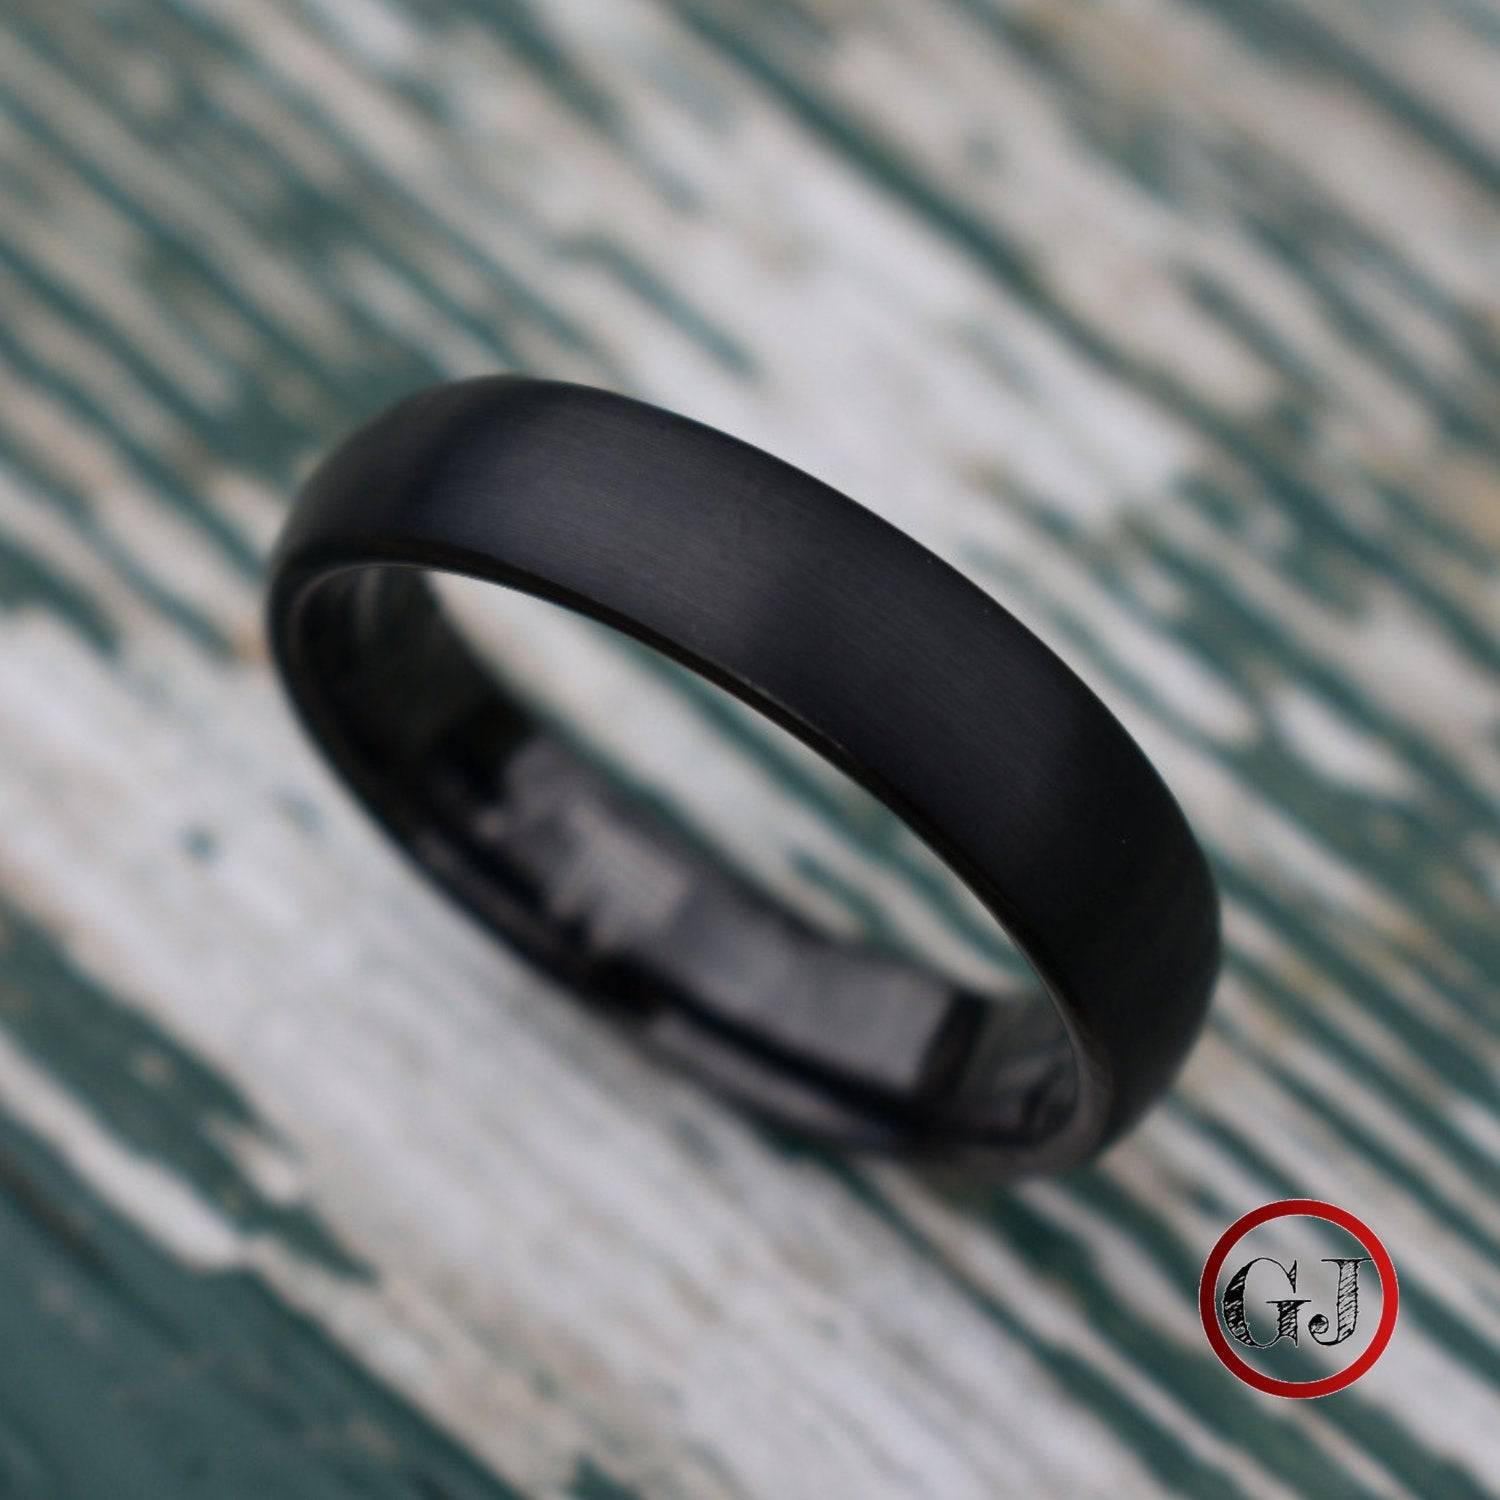 Black Brushed Tungsten 6mm Ring with Black Polished Inner Band - Tungsten Titans